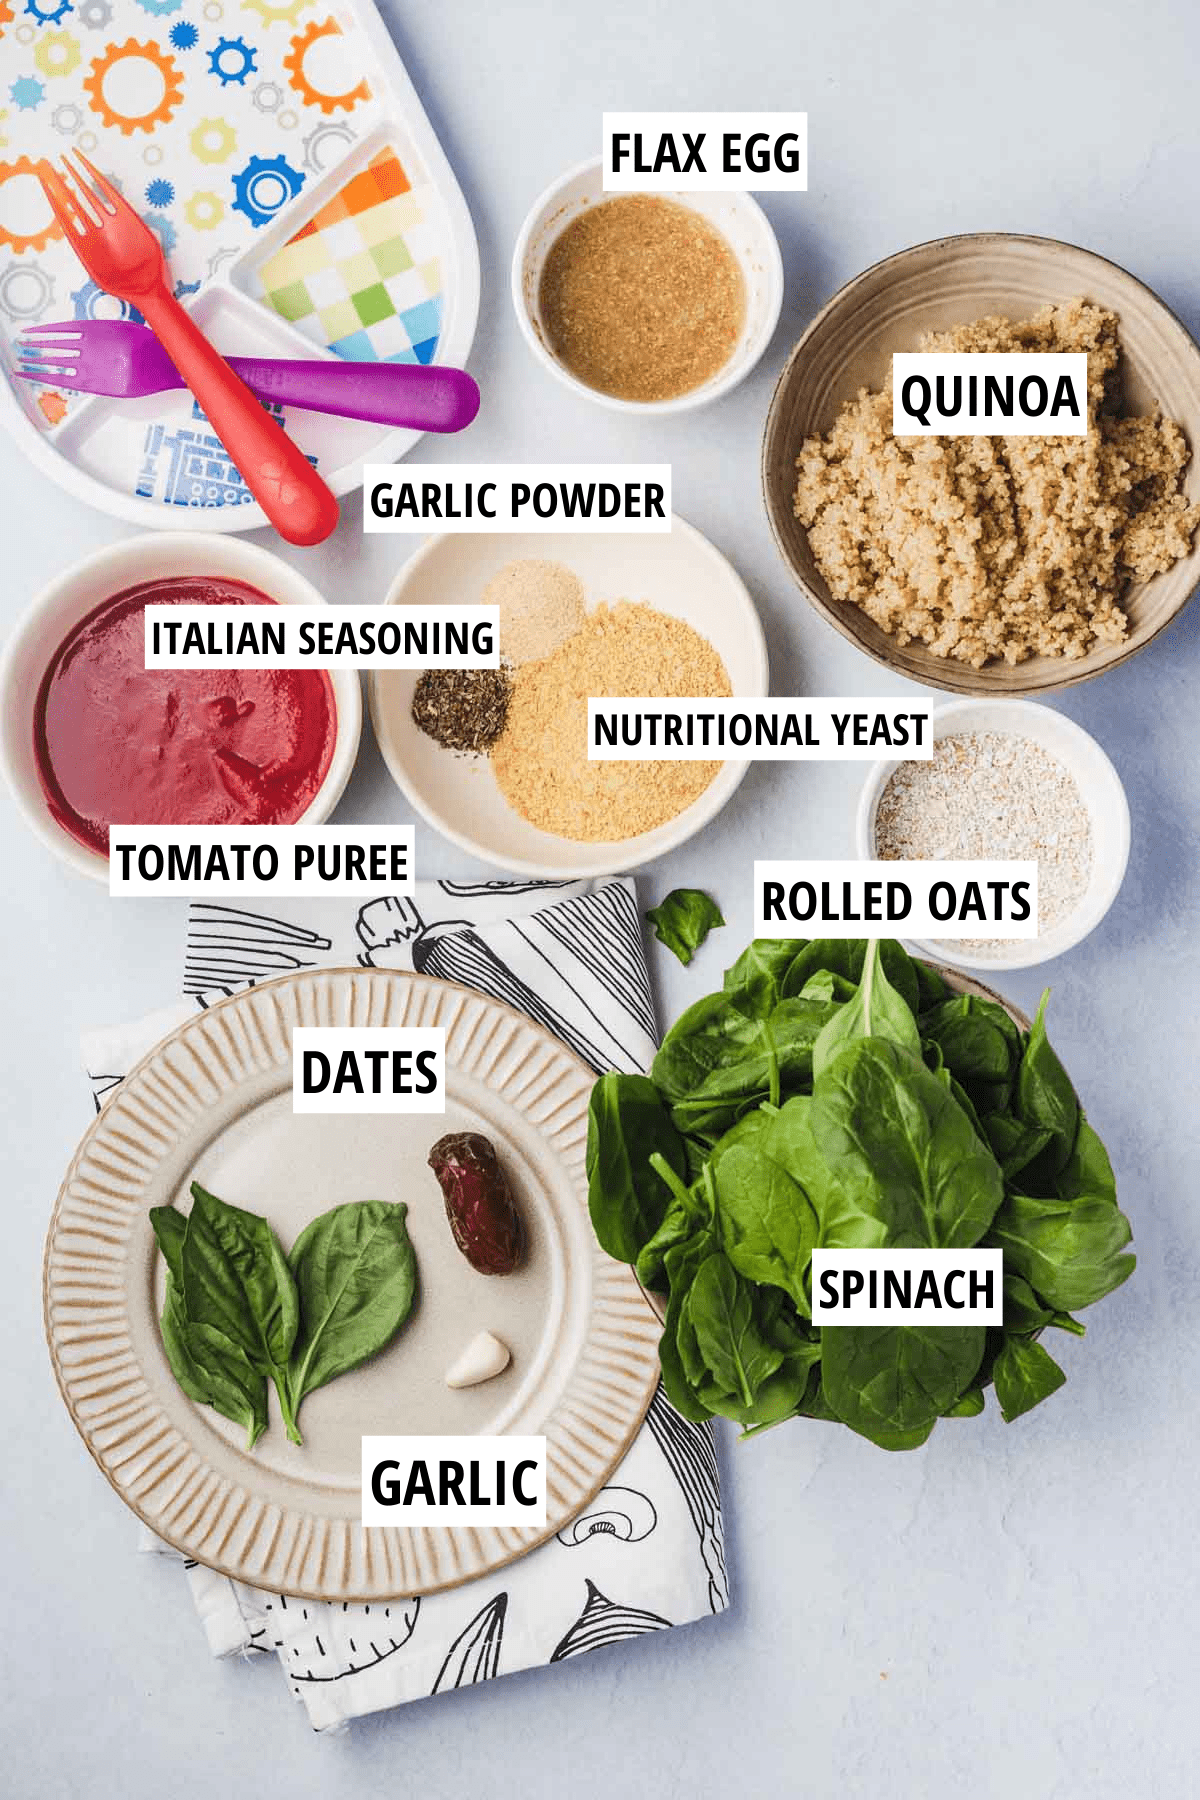 Birds eye view of ingredients, including quinoa, flax egg, seasoning, tomato puree, spinach, dates, garlic, and oats.